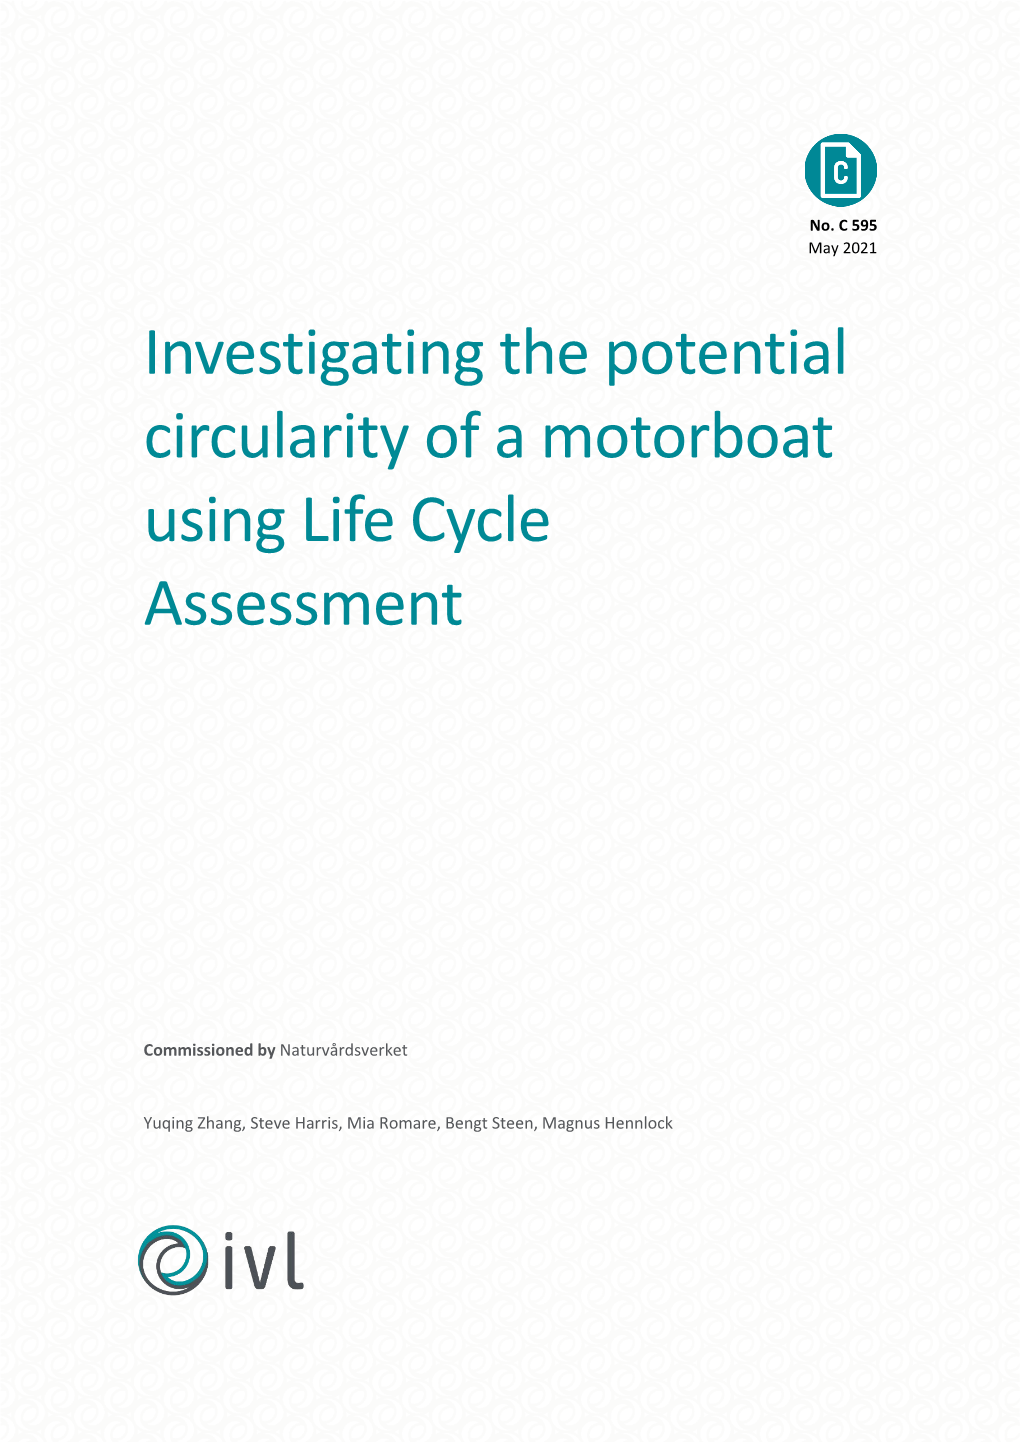 Investigating the Potential Circularity of a Motorboat Using Life Cycle Assessment